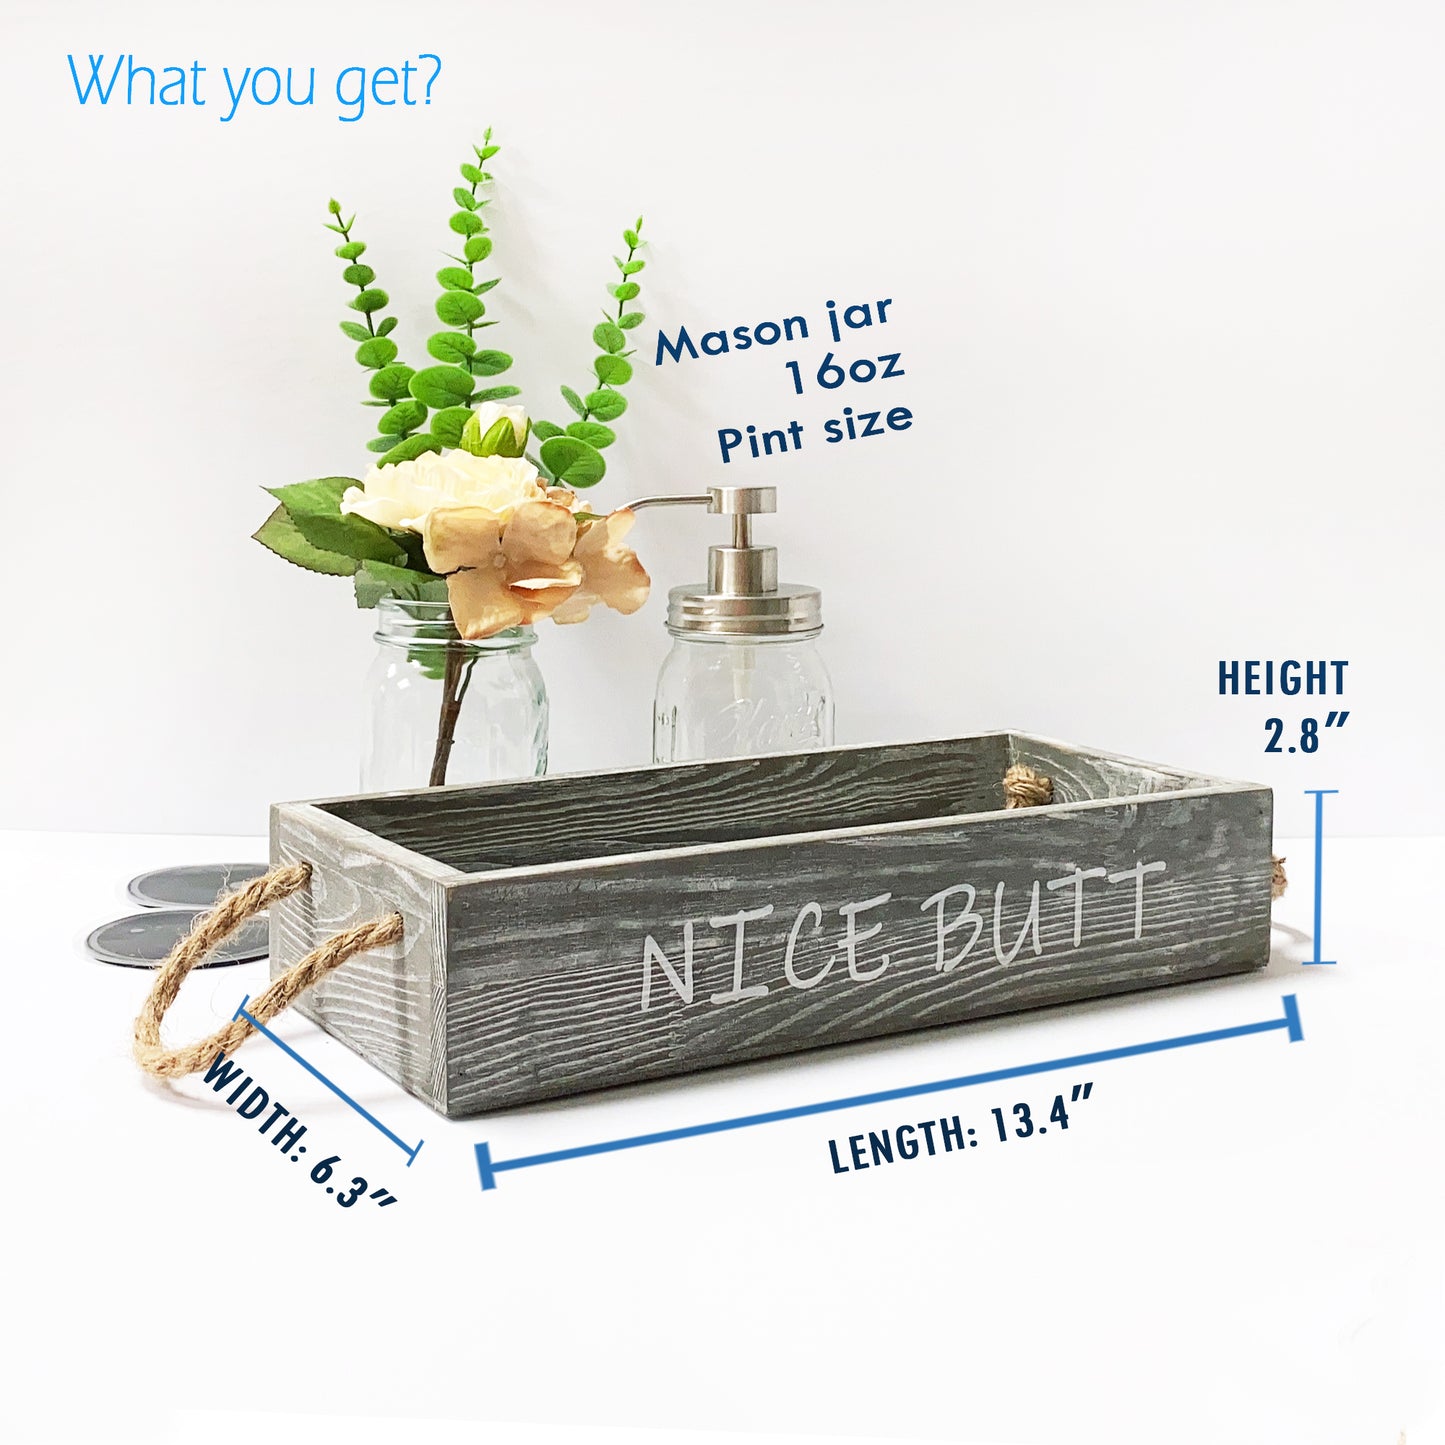 Bathroom Toilet Paper Storage Box- Rustic Decorative Paper Holder Box with 2 sided Funny Sayings Nice Butt for Home,Bathroom,Counter Decor,Mason Jar Soap Dispenser and Flower,Grey